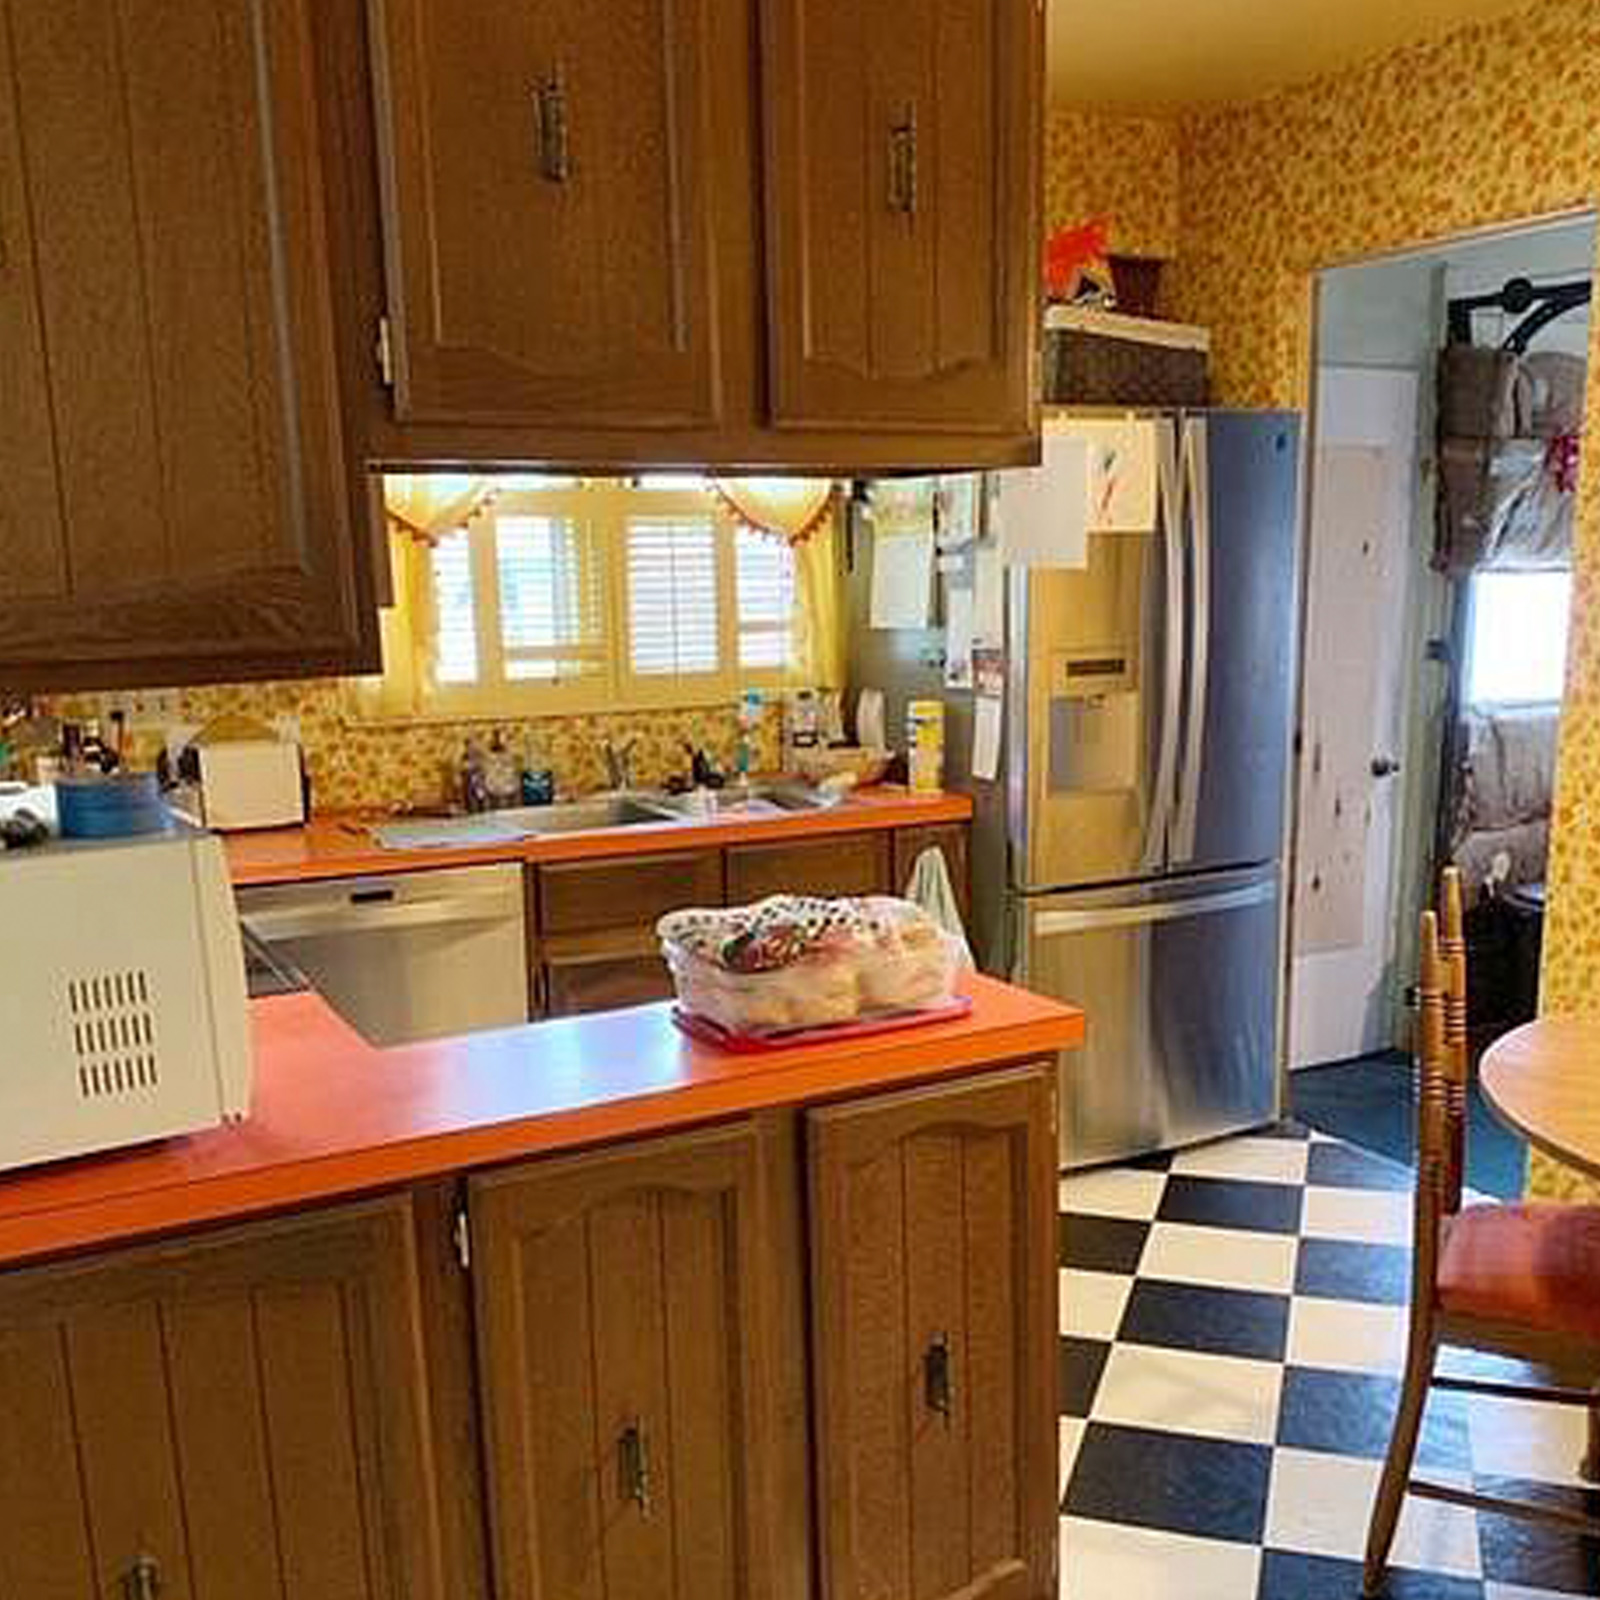 Entry 51 - A kitchen stuck in the 70's provides ample opportunity for improvement